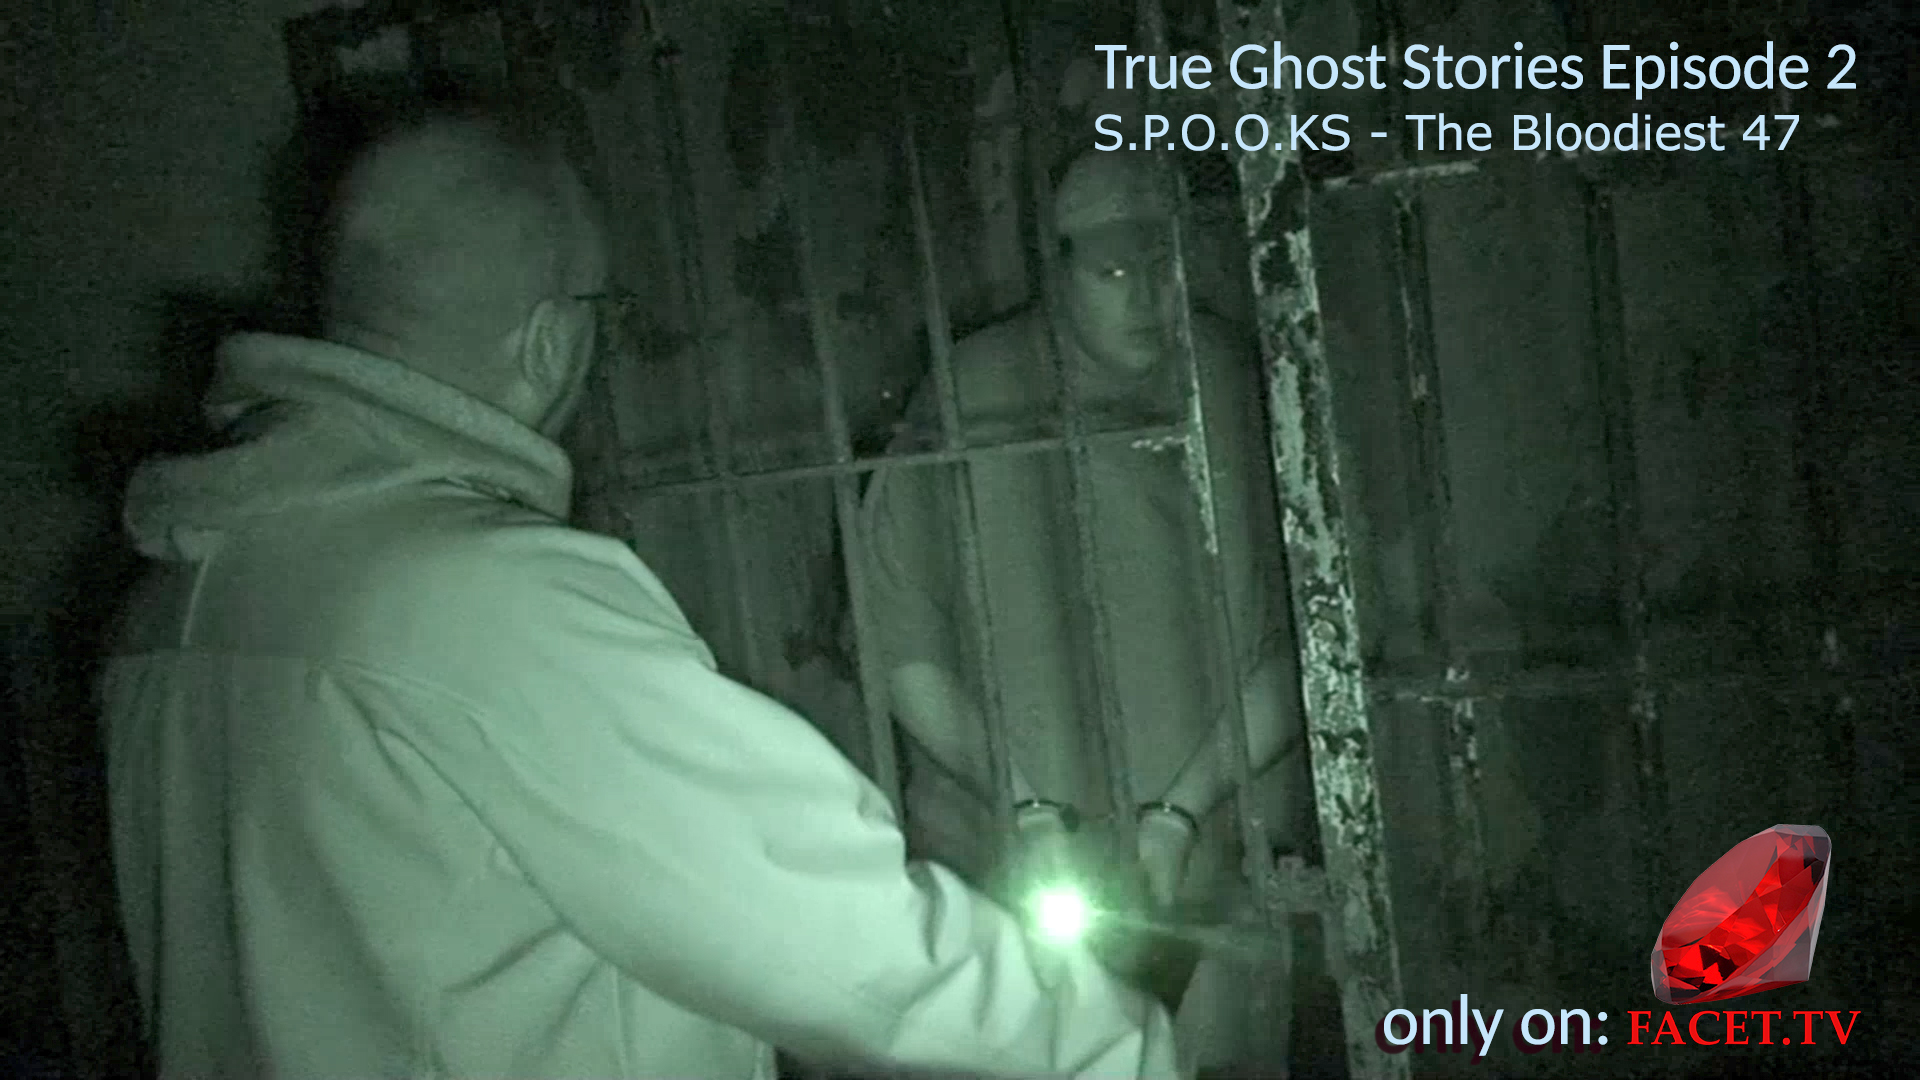 Photo for True Ghost Stories Episode TWO - S.P.O.O.KS -The Bloodiest 47 on ViewStub